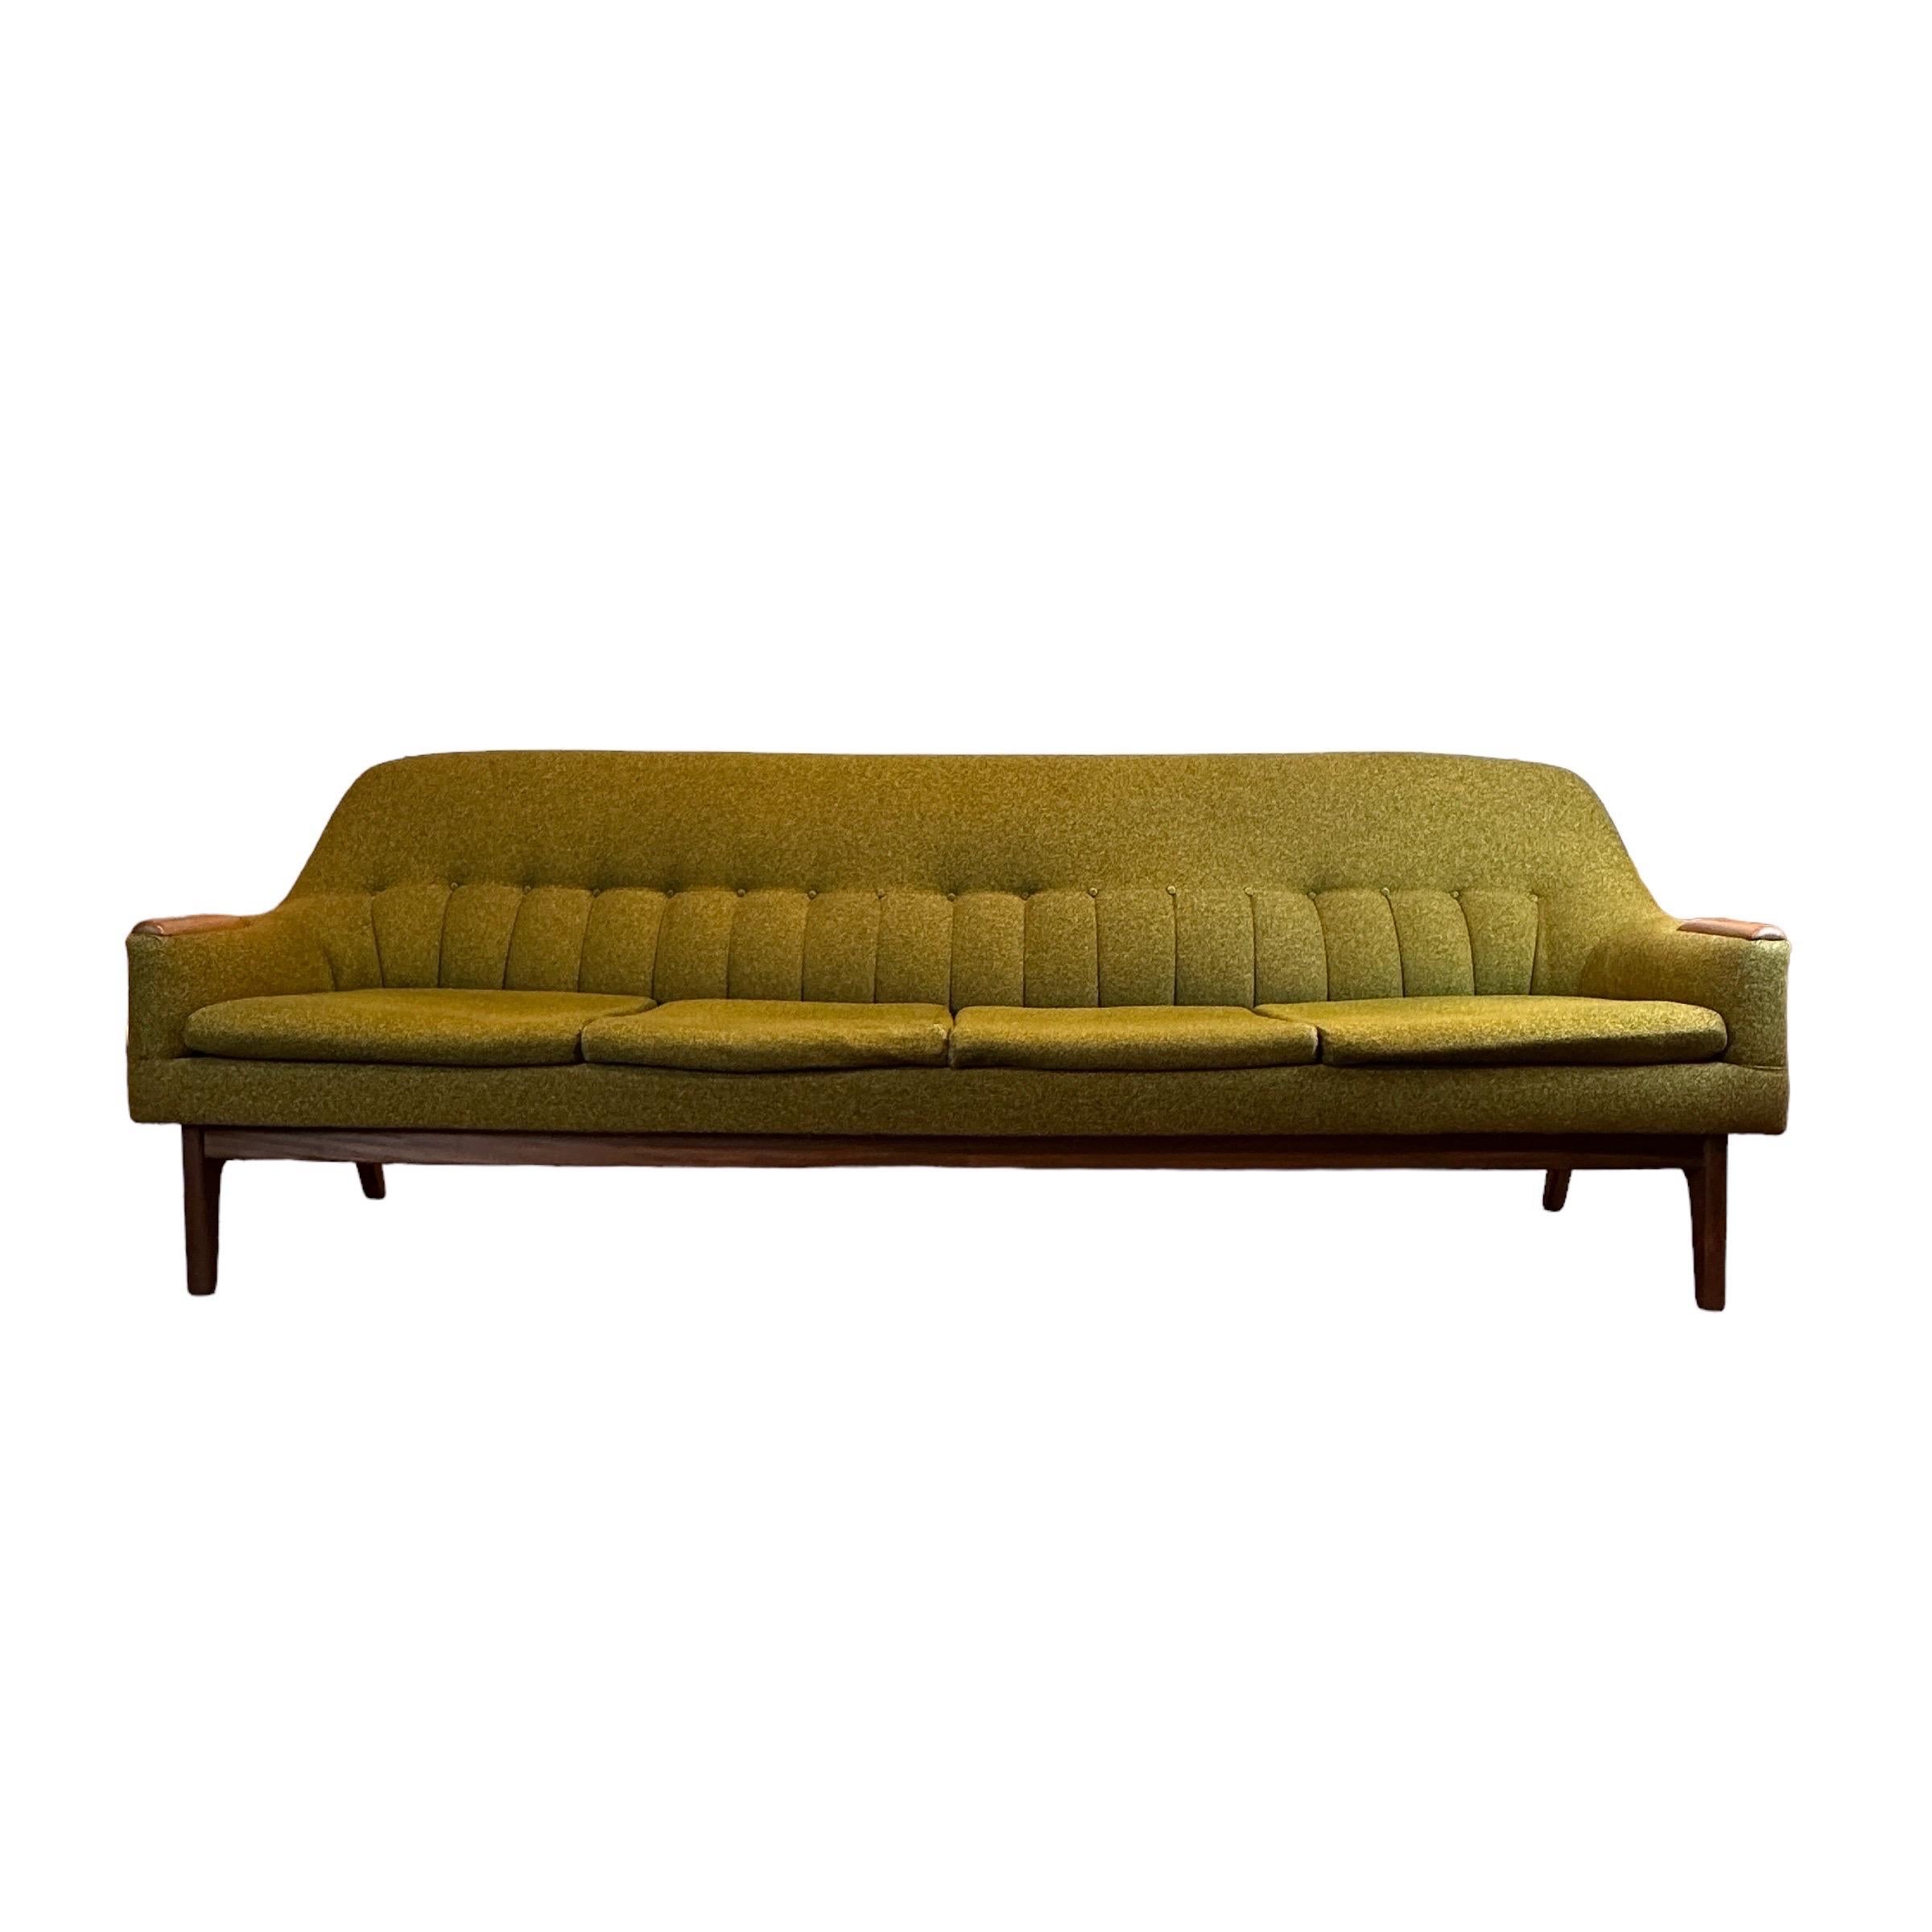 Condition: Great Vintage Condition

Dimensions: 97” L x 27” D x 33” H (15” SH)

Description: A great quality teak 4 seater sofa. Solid teak arm rests and base. Made in Canada, Circa 1960s. Rich olive green colour.